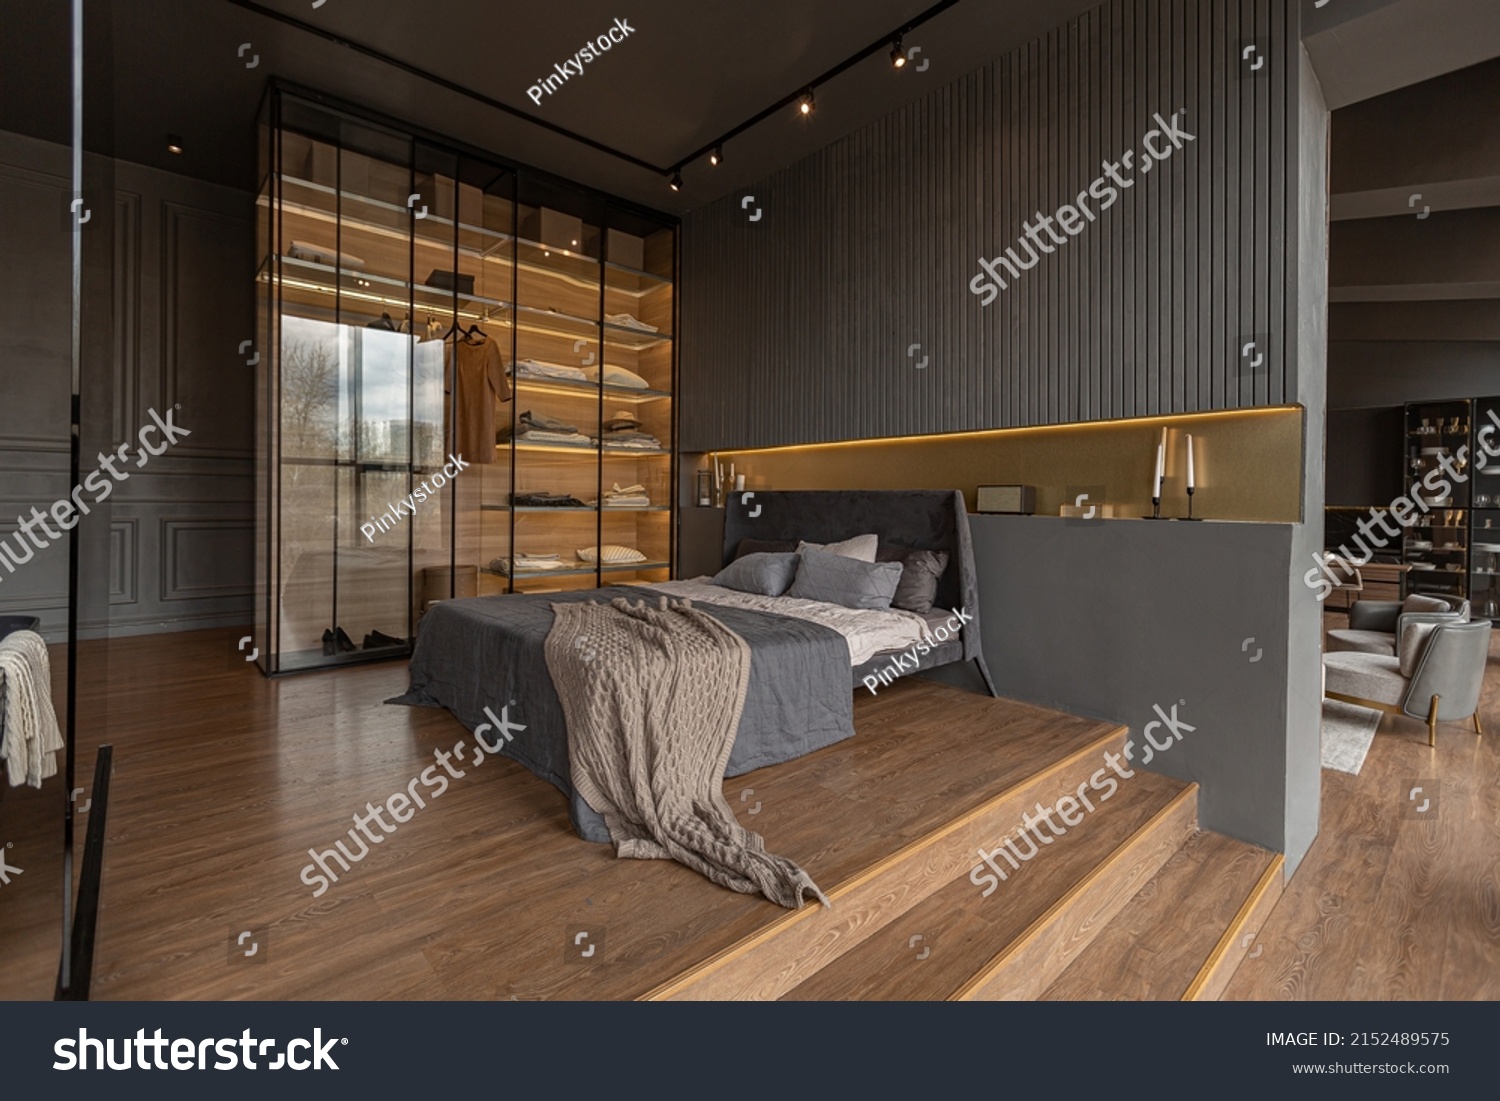 bedroom and freestanding bath behind a glass partition in a chic expensive interior of a luxury home with a dark modern design with wood trim and led light #2152489575